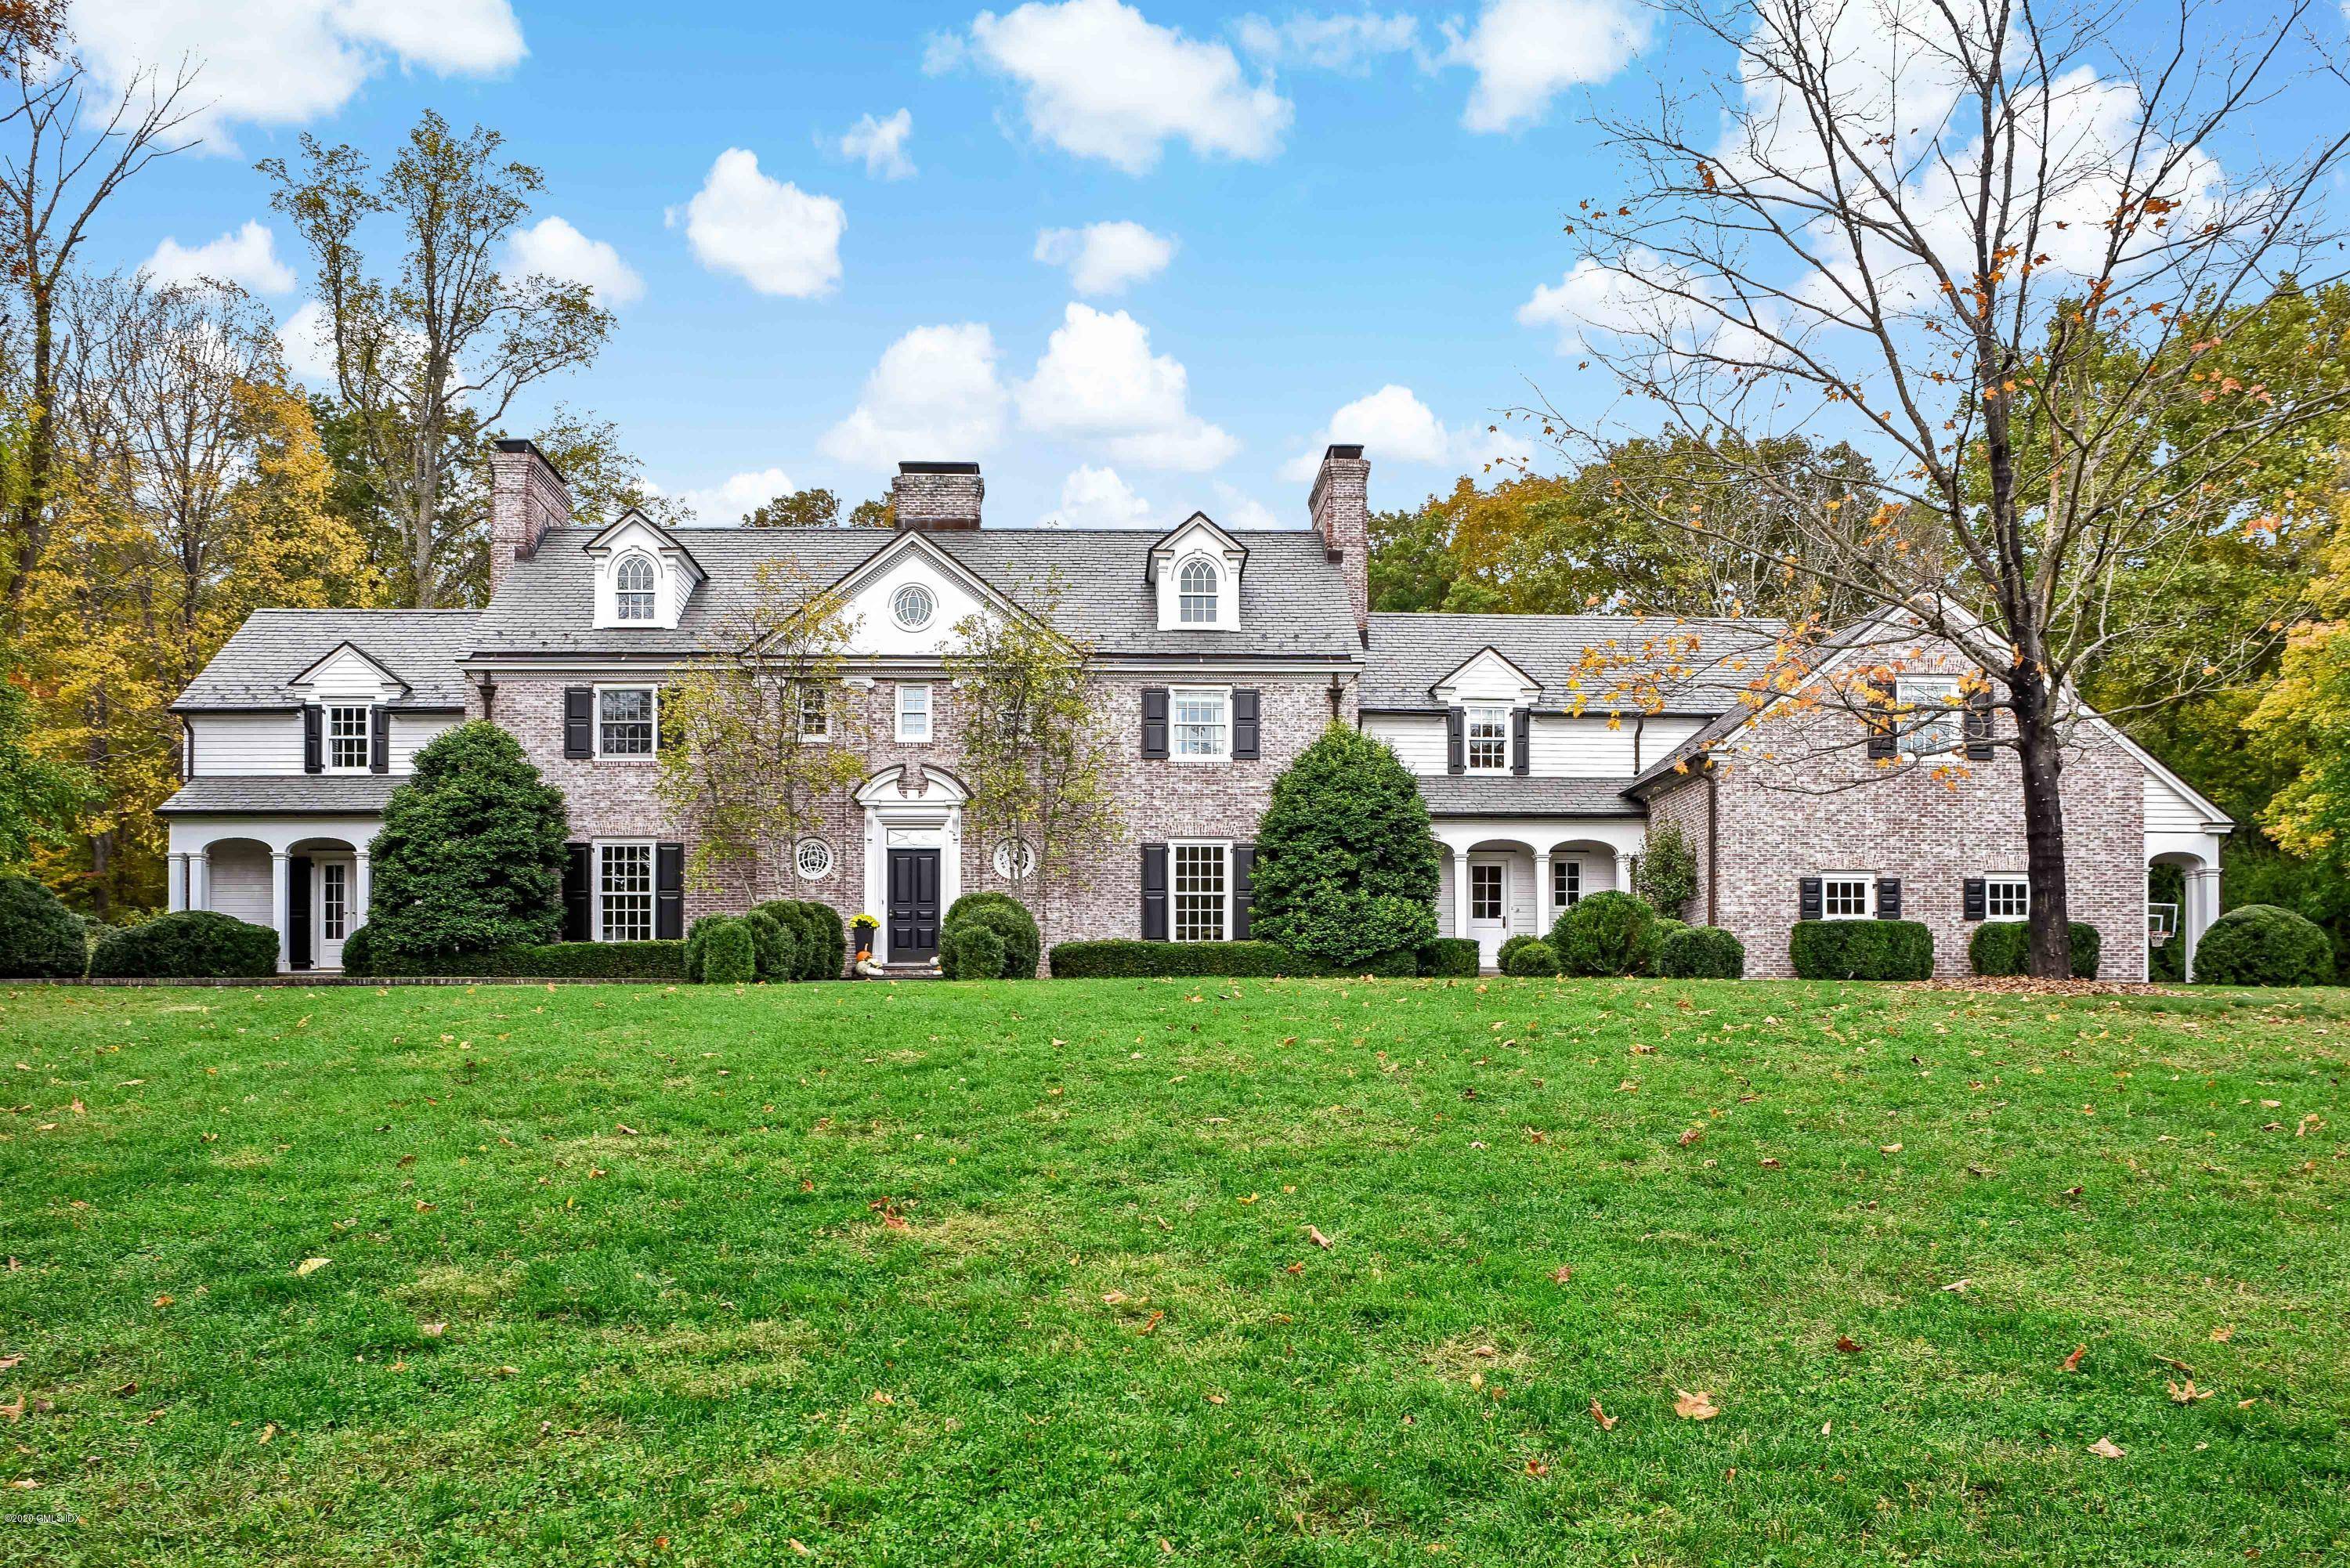 Located on one of New Canaan's most desirable West side streets is this beautiful brick Georgian colonial blending today's modern amenities with the charm and character of yesteryear.